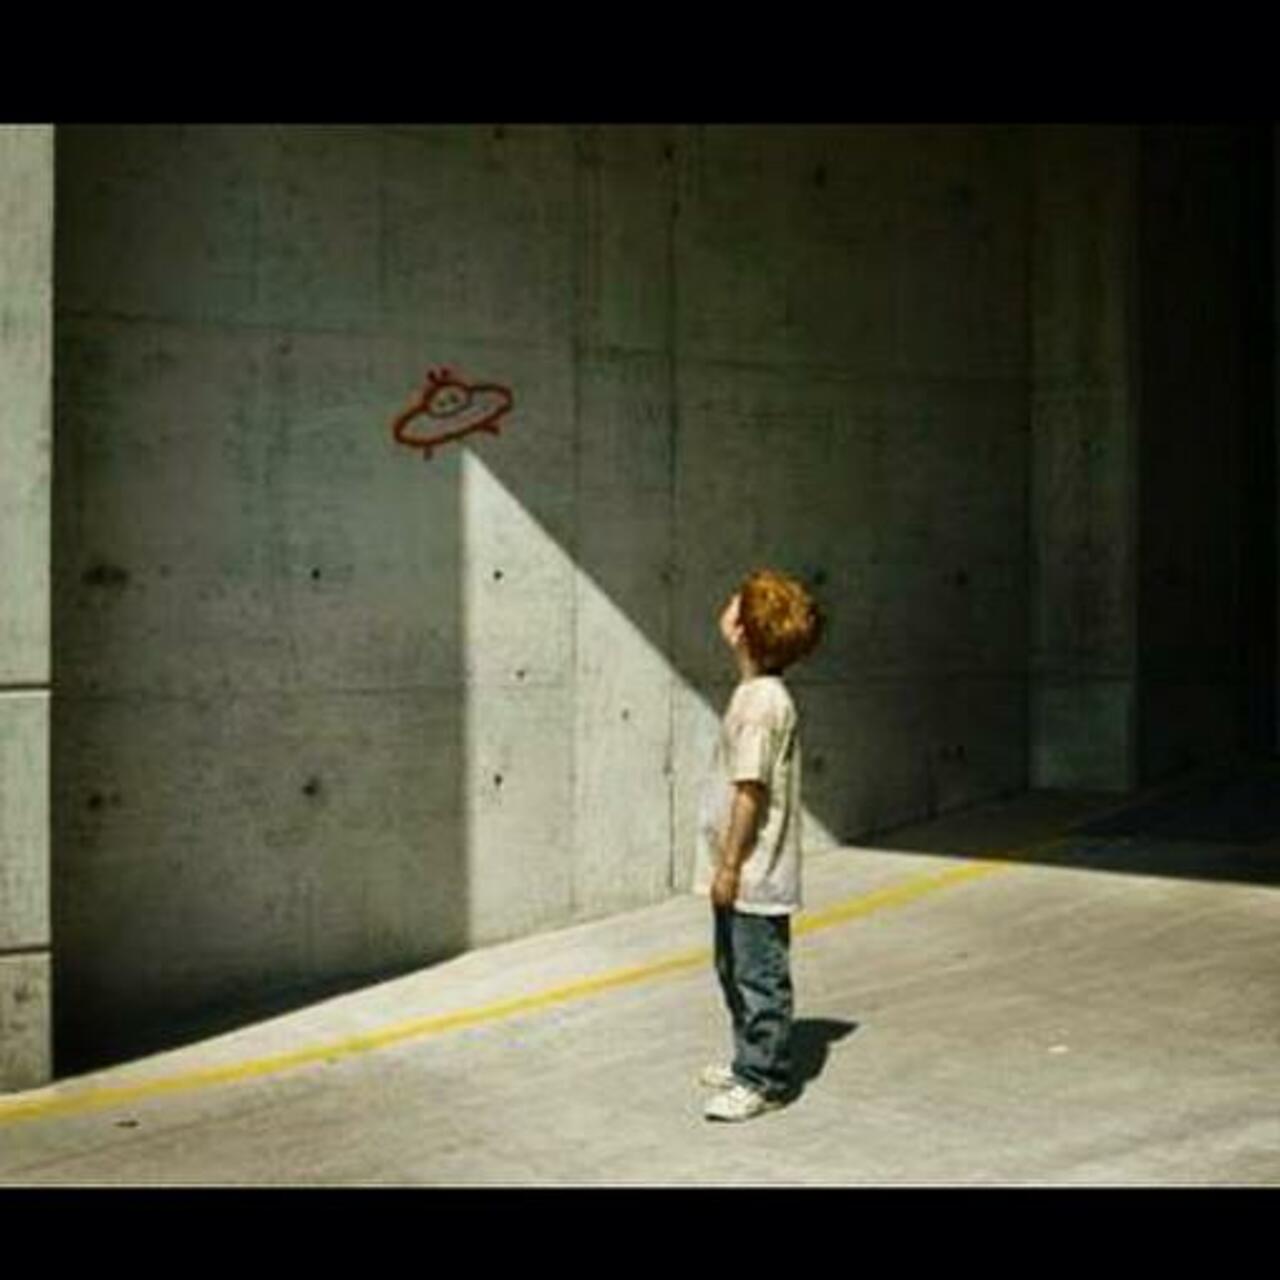 Cool use of light for art. Some people are so damn clever.  #simple #art #graffiti #streetart http://t.co/7npu7KgSya